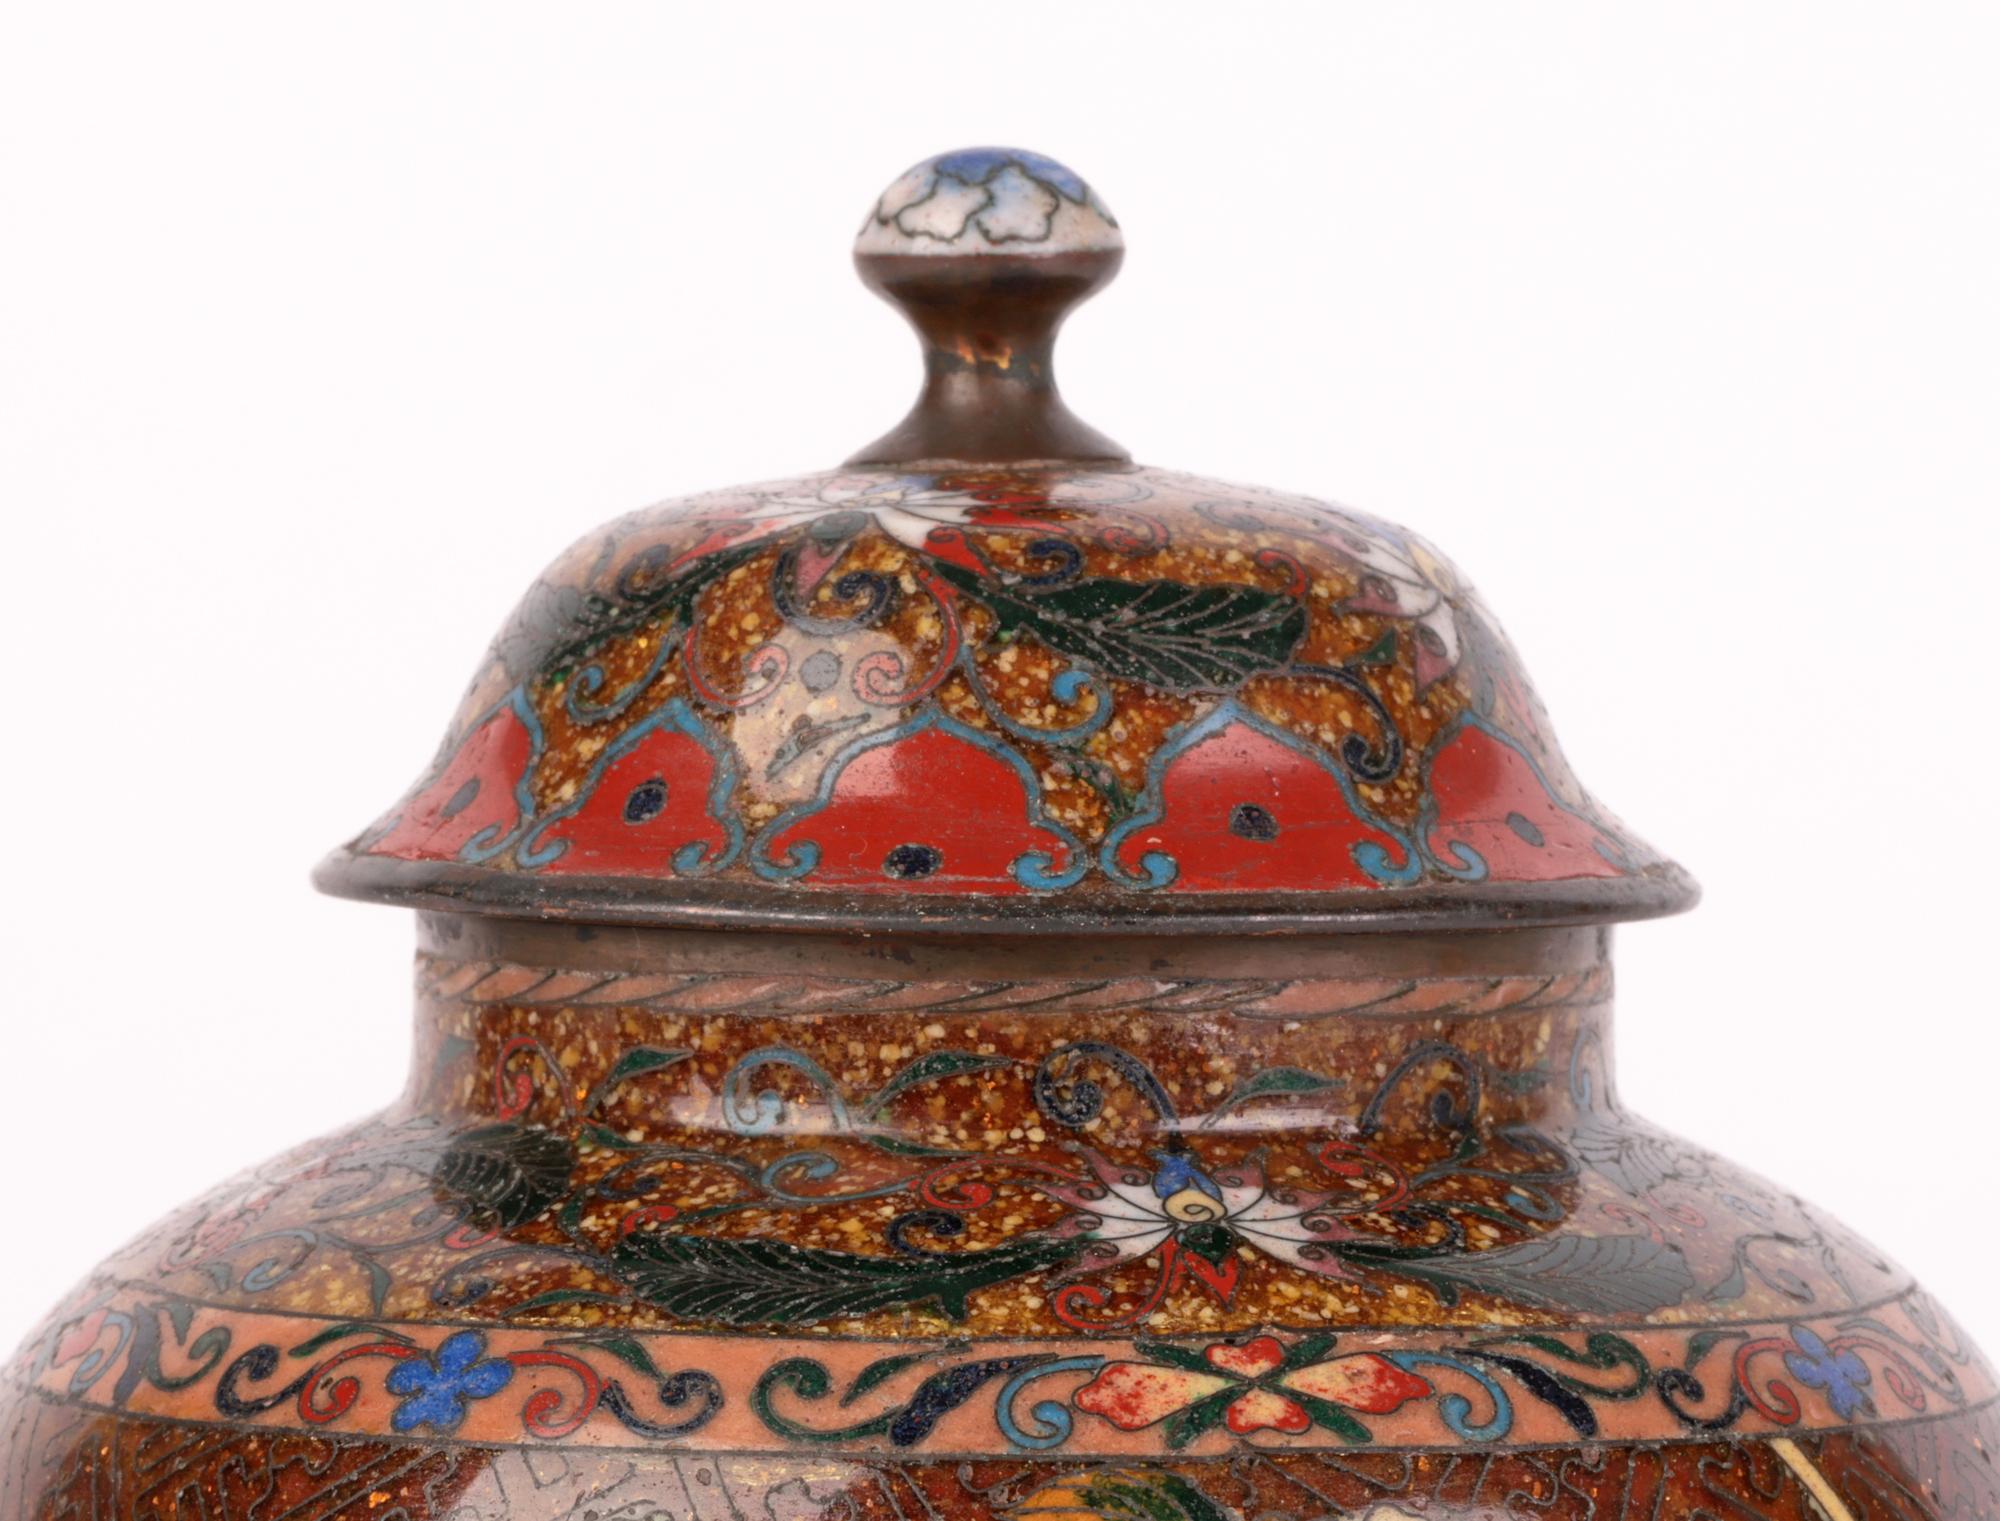 A very fine Japanese Meiji cloisonne lidded jar decorated with butterflies amidst bamboo and flowering shrubs dating from the latter 19th Century. The jar of rounded bulbous shape stands on a narrow round foot with a raised narrow neck and hat